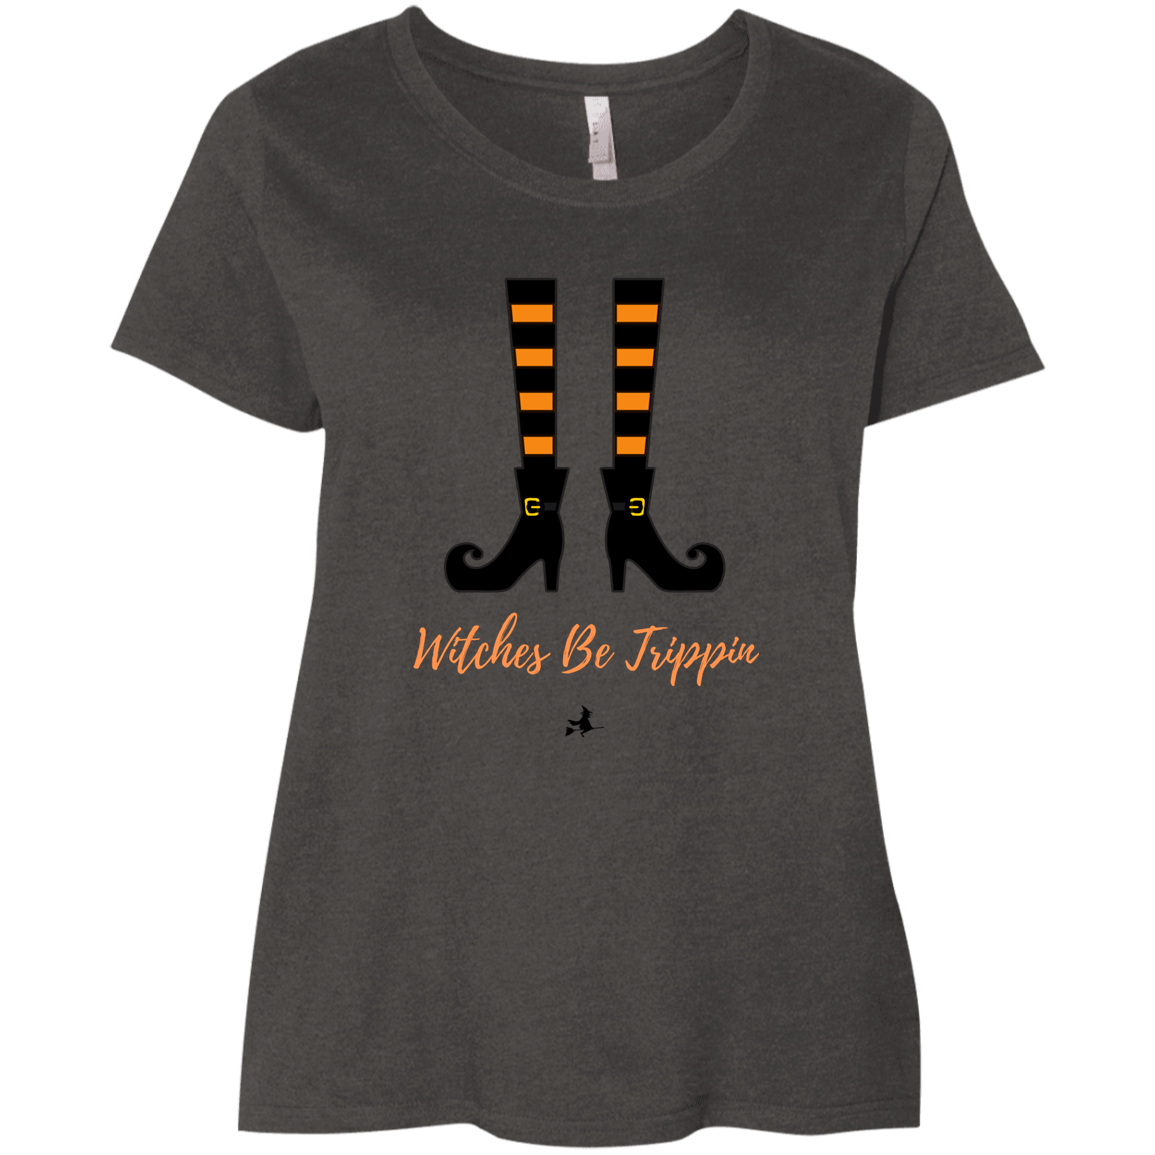 Witches Be Trippin' - Ladies' Curvy Halloween T-Shirt